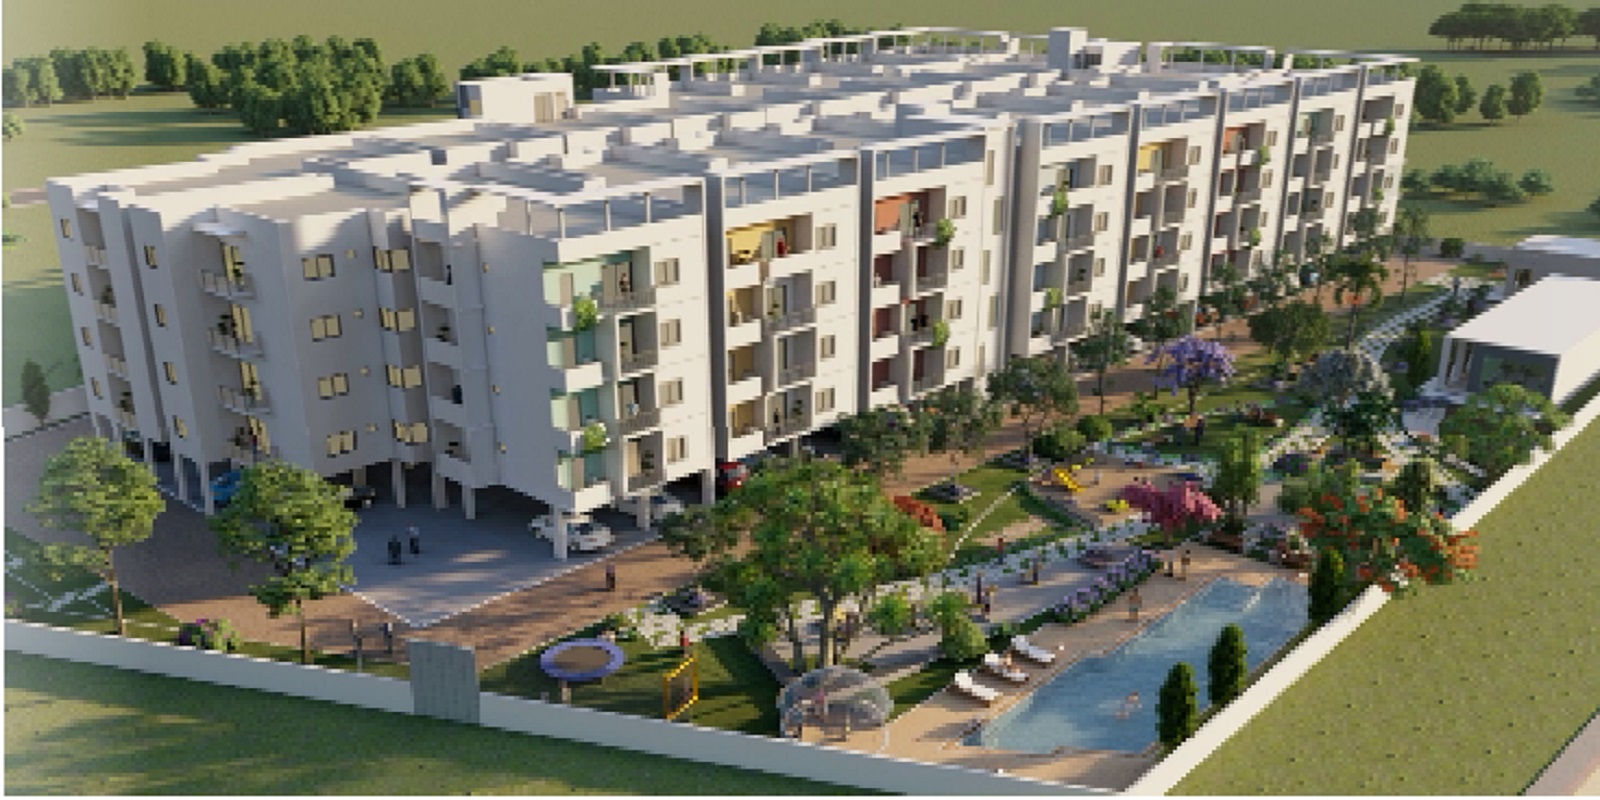 As said previously, on the off chance that you are searching for polished and contemporary 2 bhk apartments for sale in Chandapura Bangalore, Subha Elan is an ideal decision.